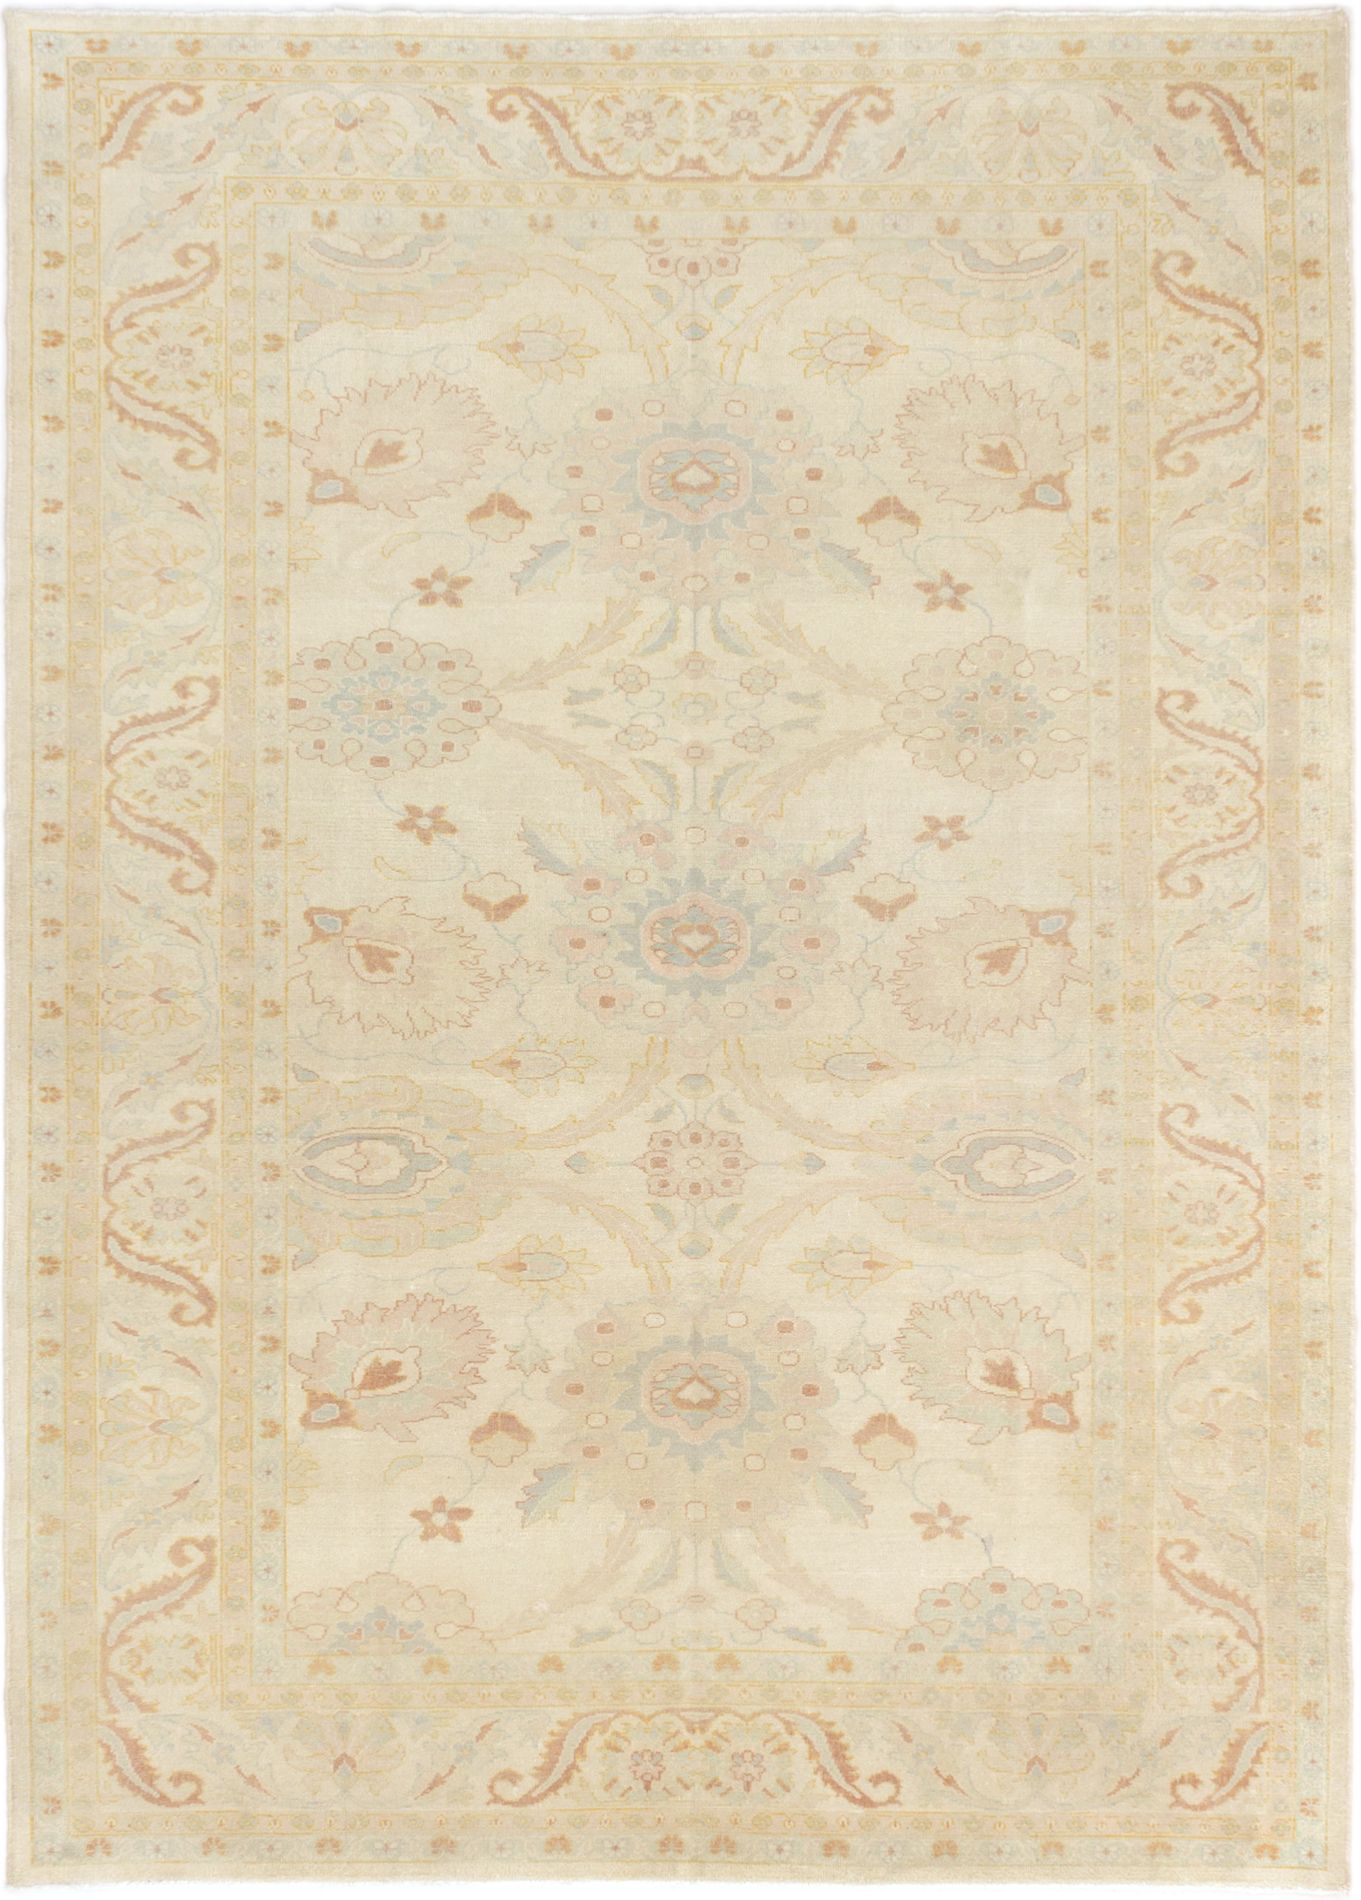 Hand-knotted Authentic Ushak Cream Wool Rug 6'3" x 8'6" Size: 6'3" x 8'6"  